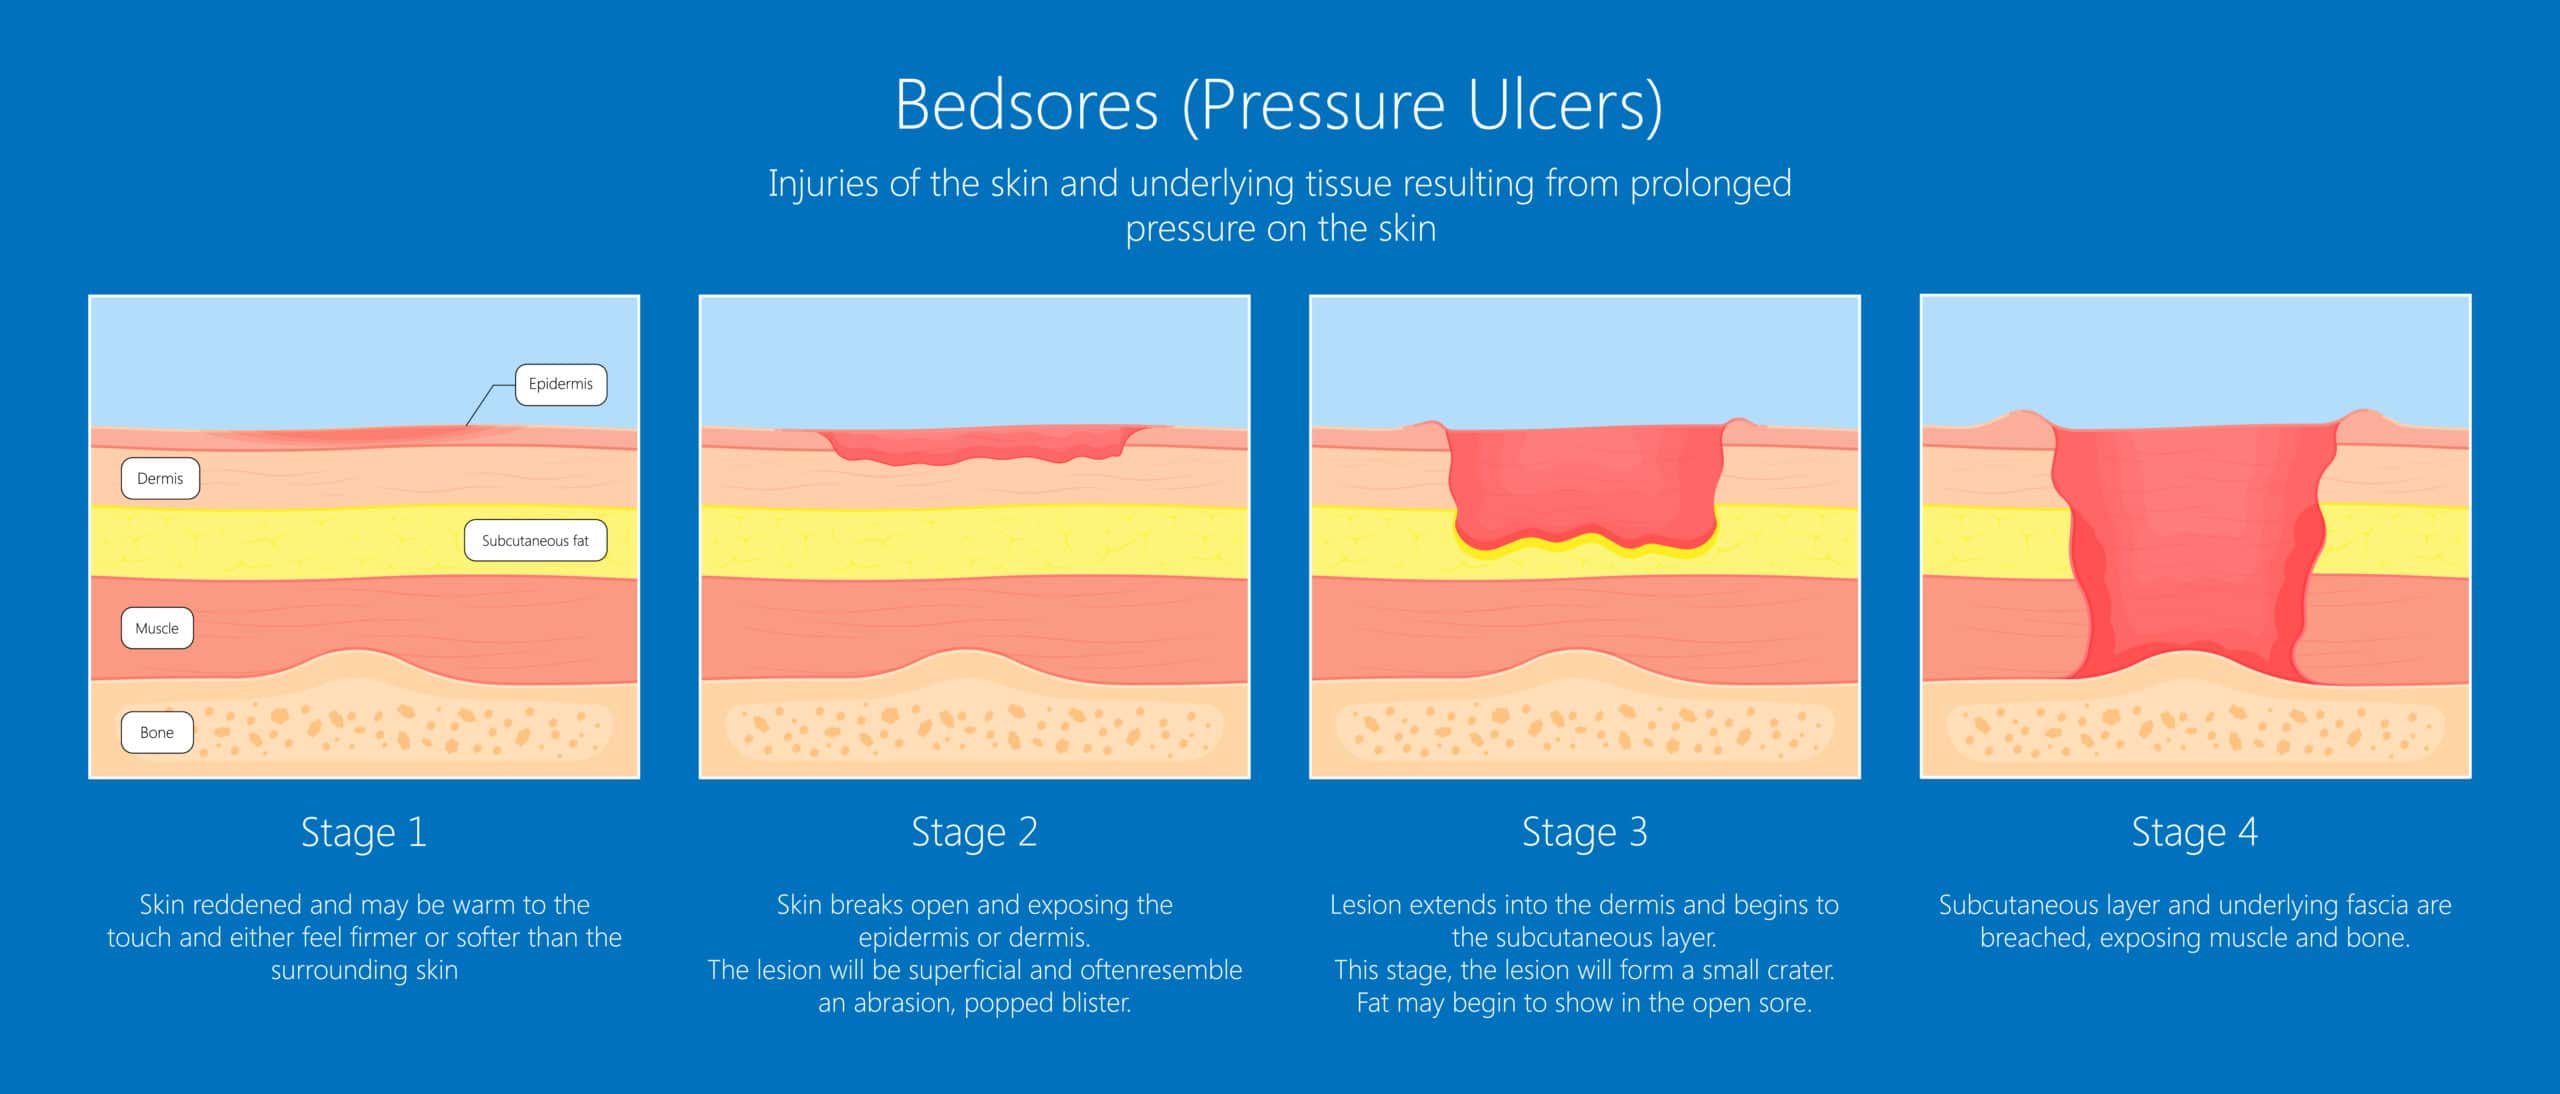 stages of bedsores, pressure ulcers